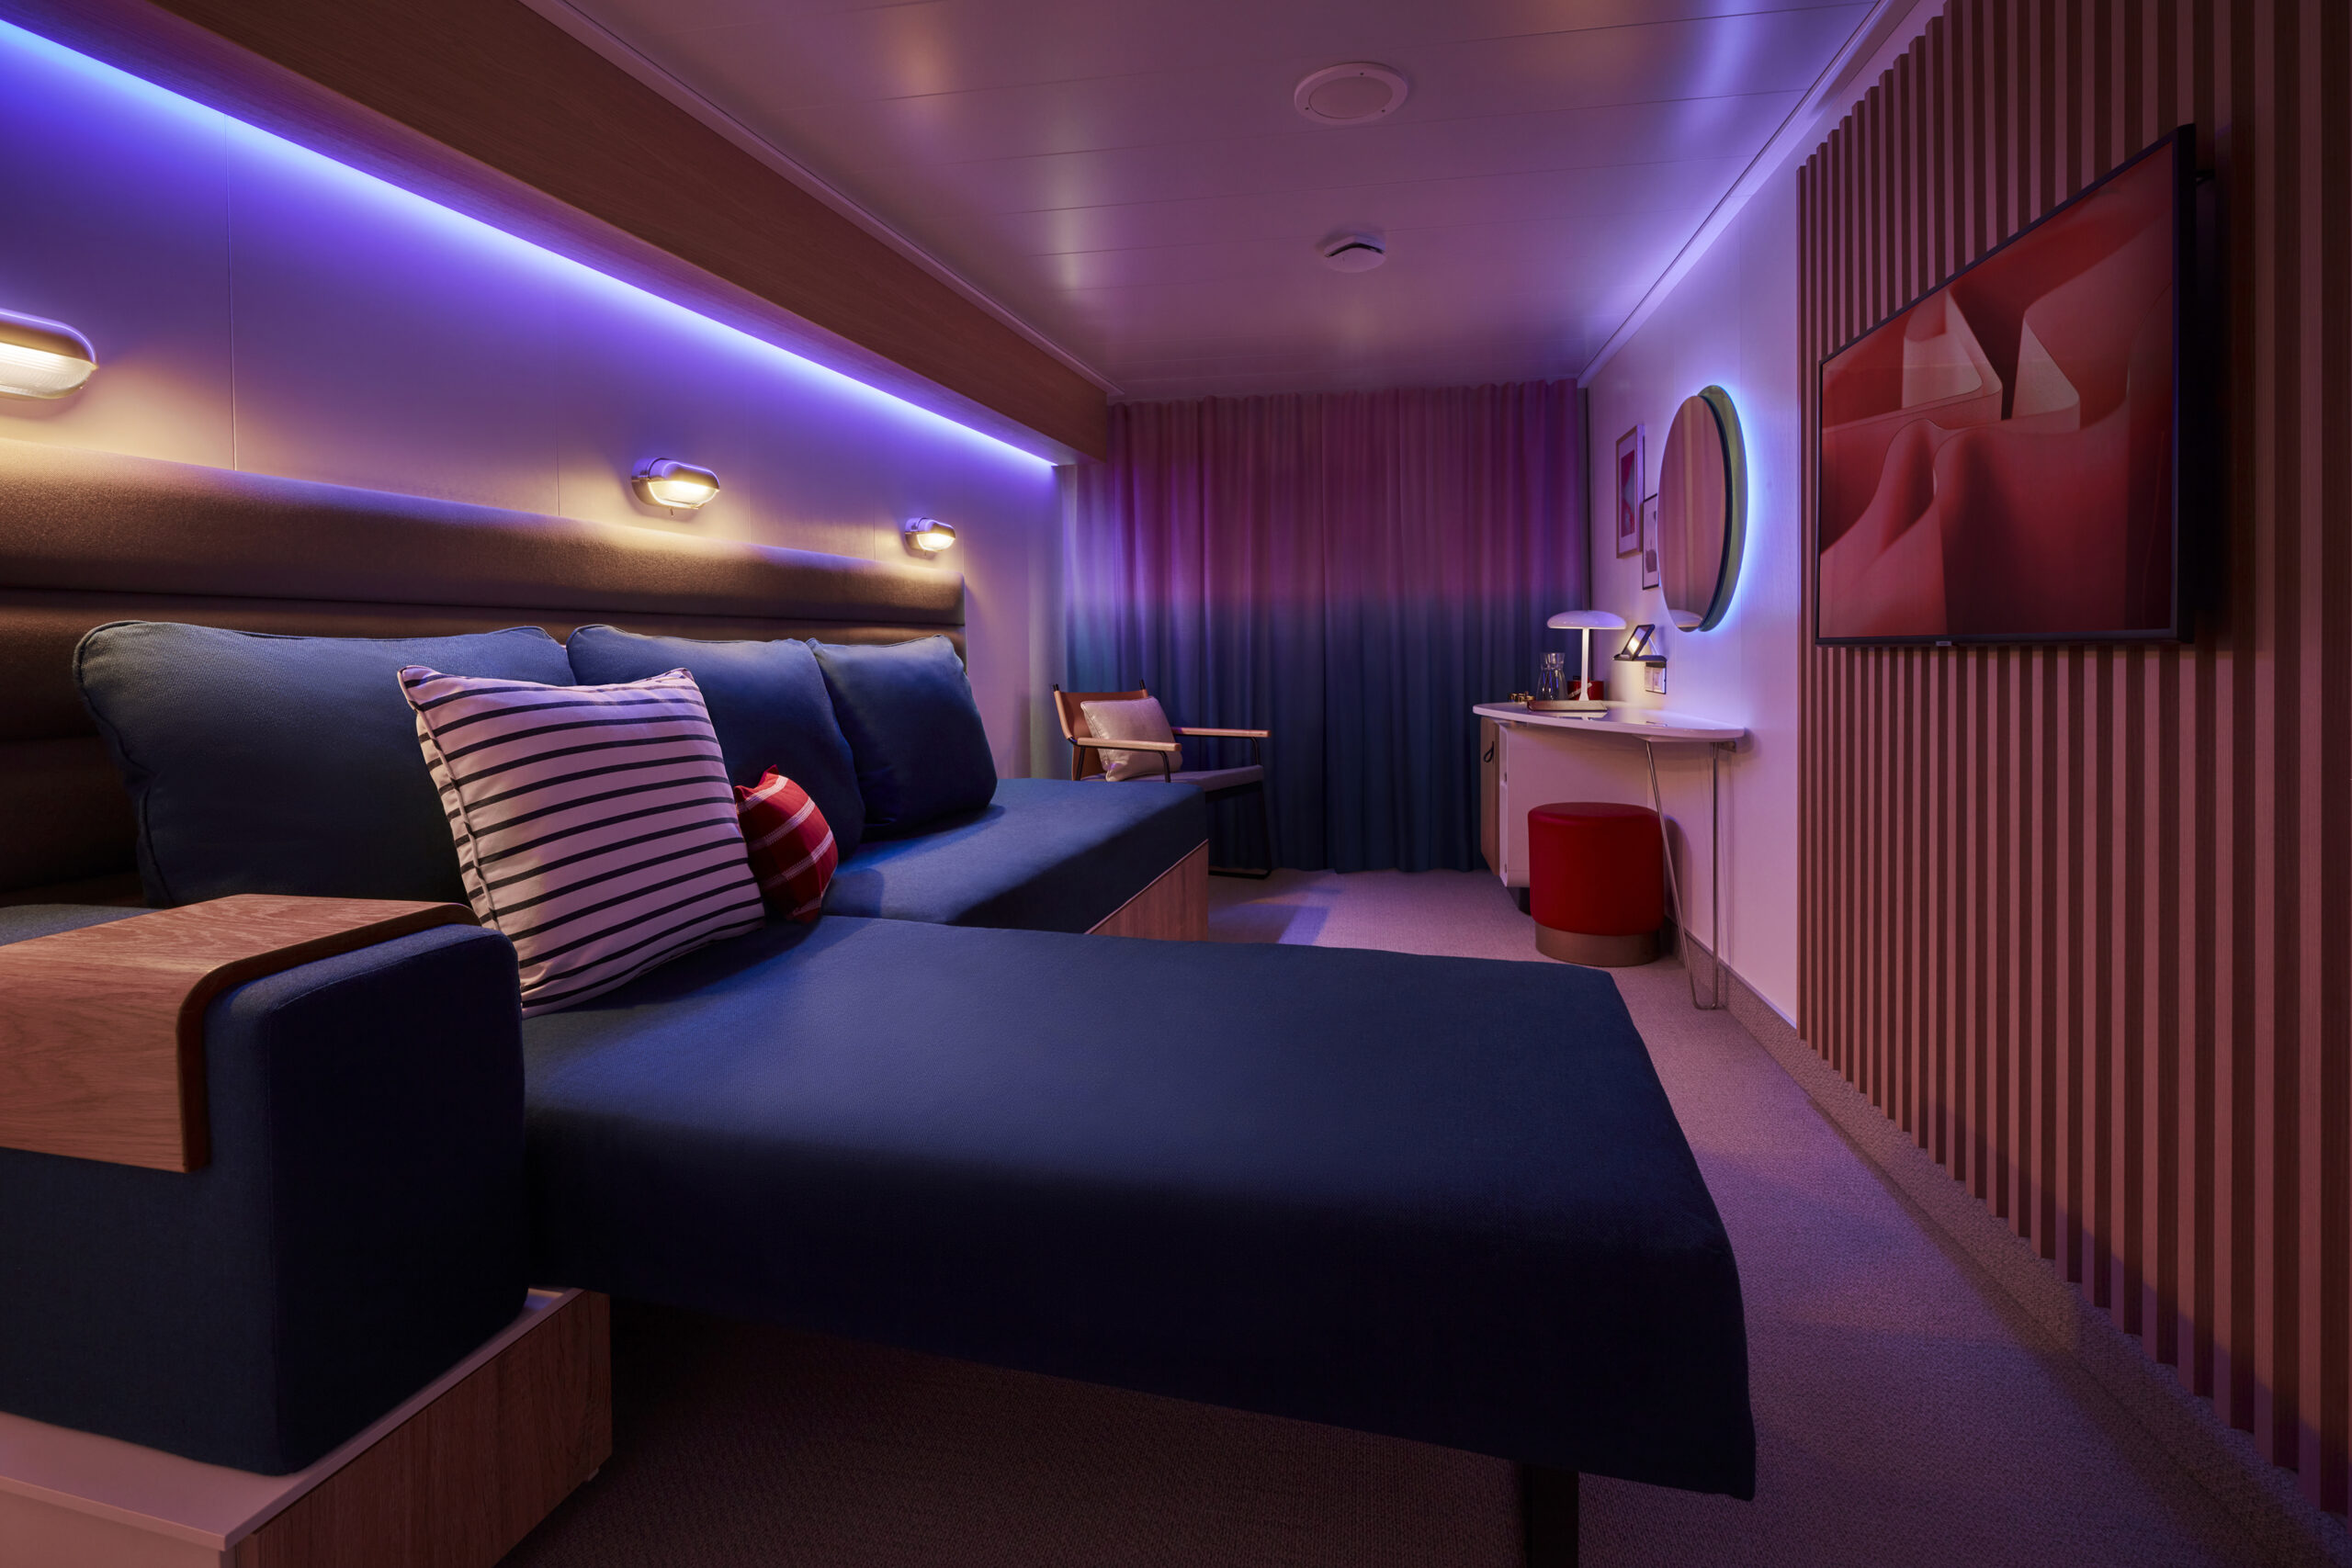 review-what-s-it-like-onboard-virgin-voyages-cruise-ship-valiant-lady